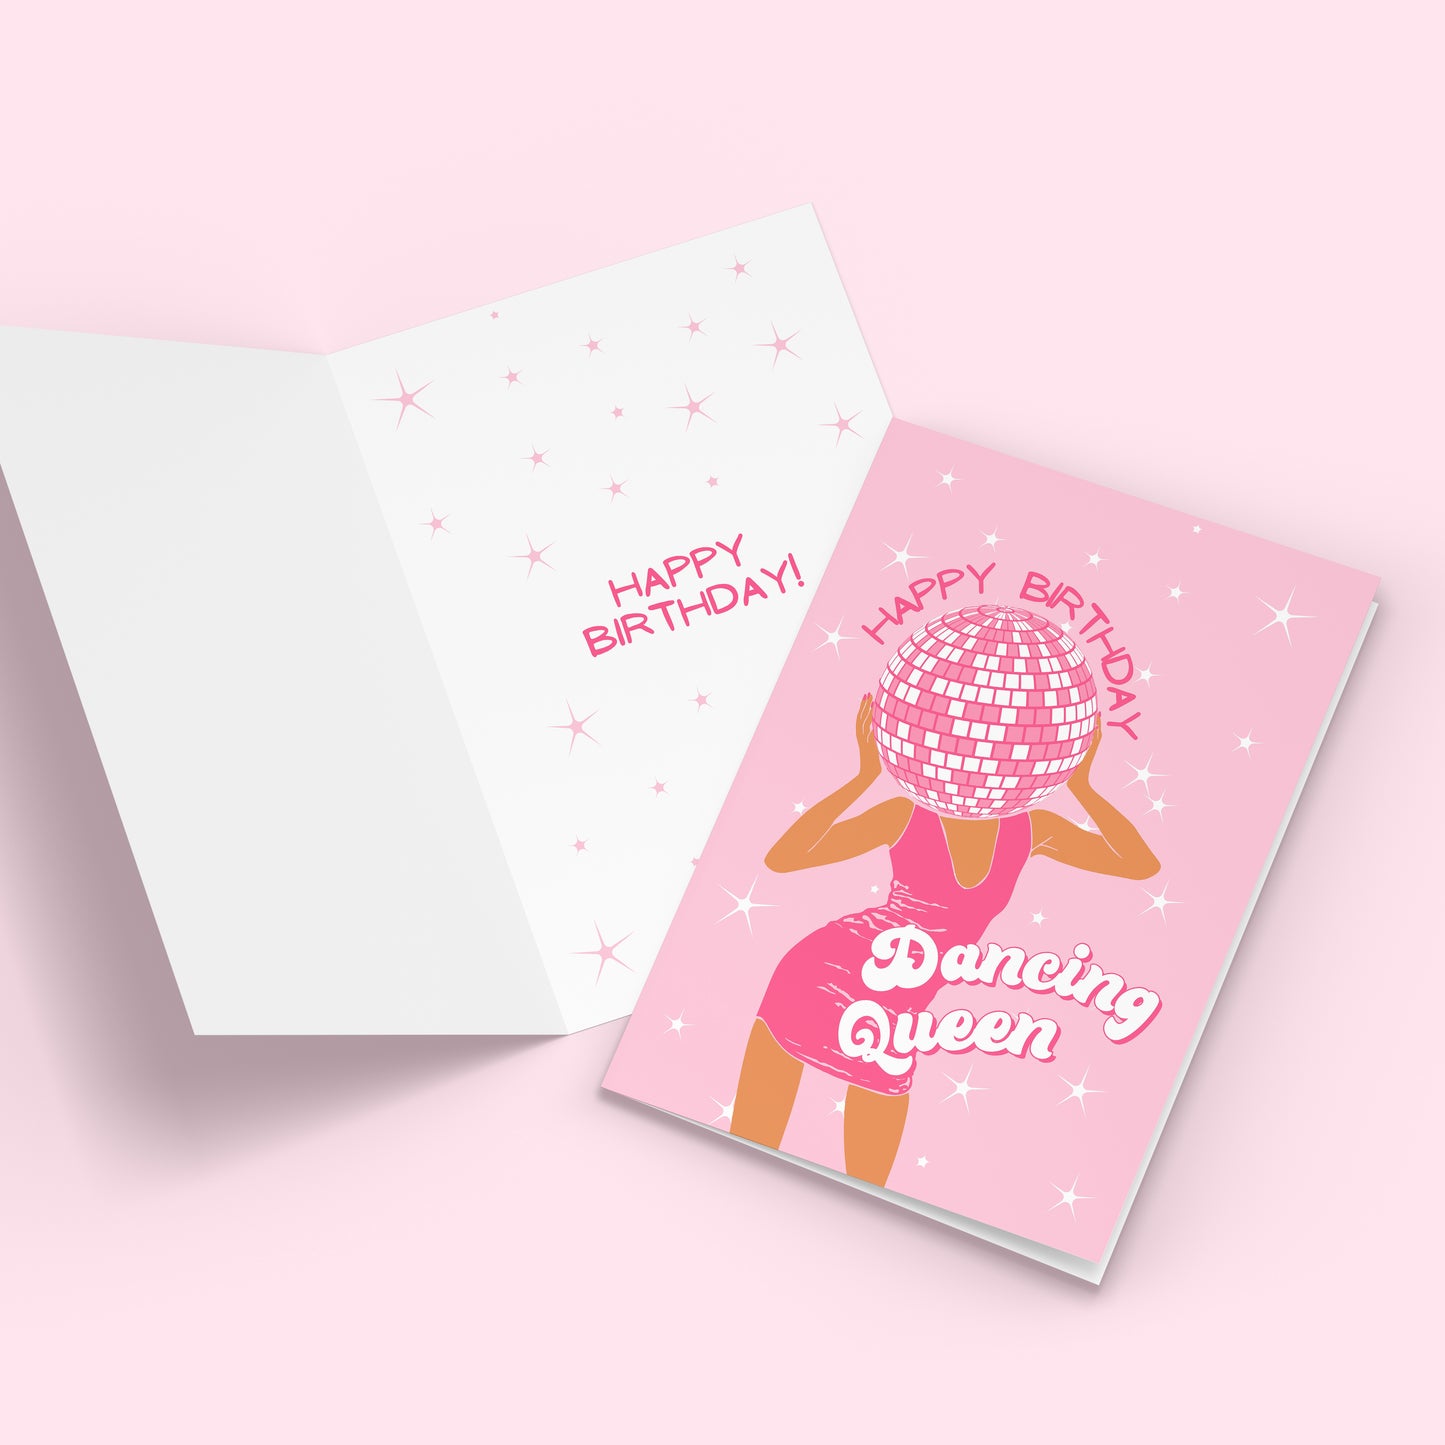 Dancing Queen Birthday Cards, Pack of 10 Birthday Cards, Disco Queen Bday Card - Pink